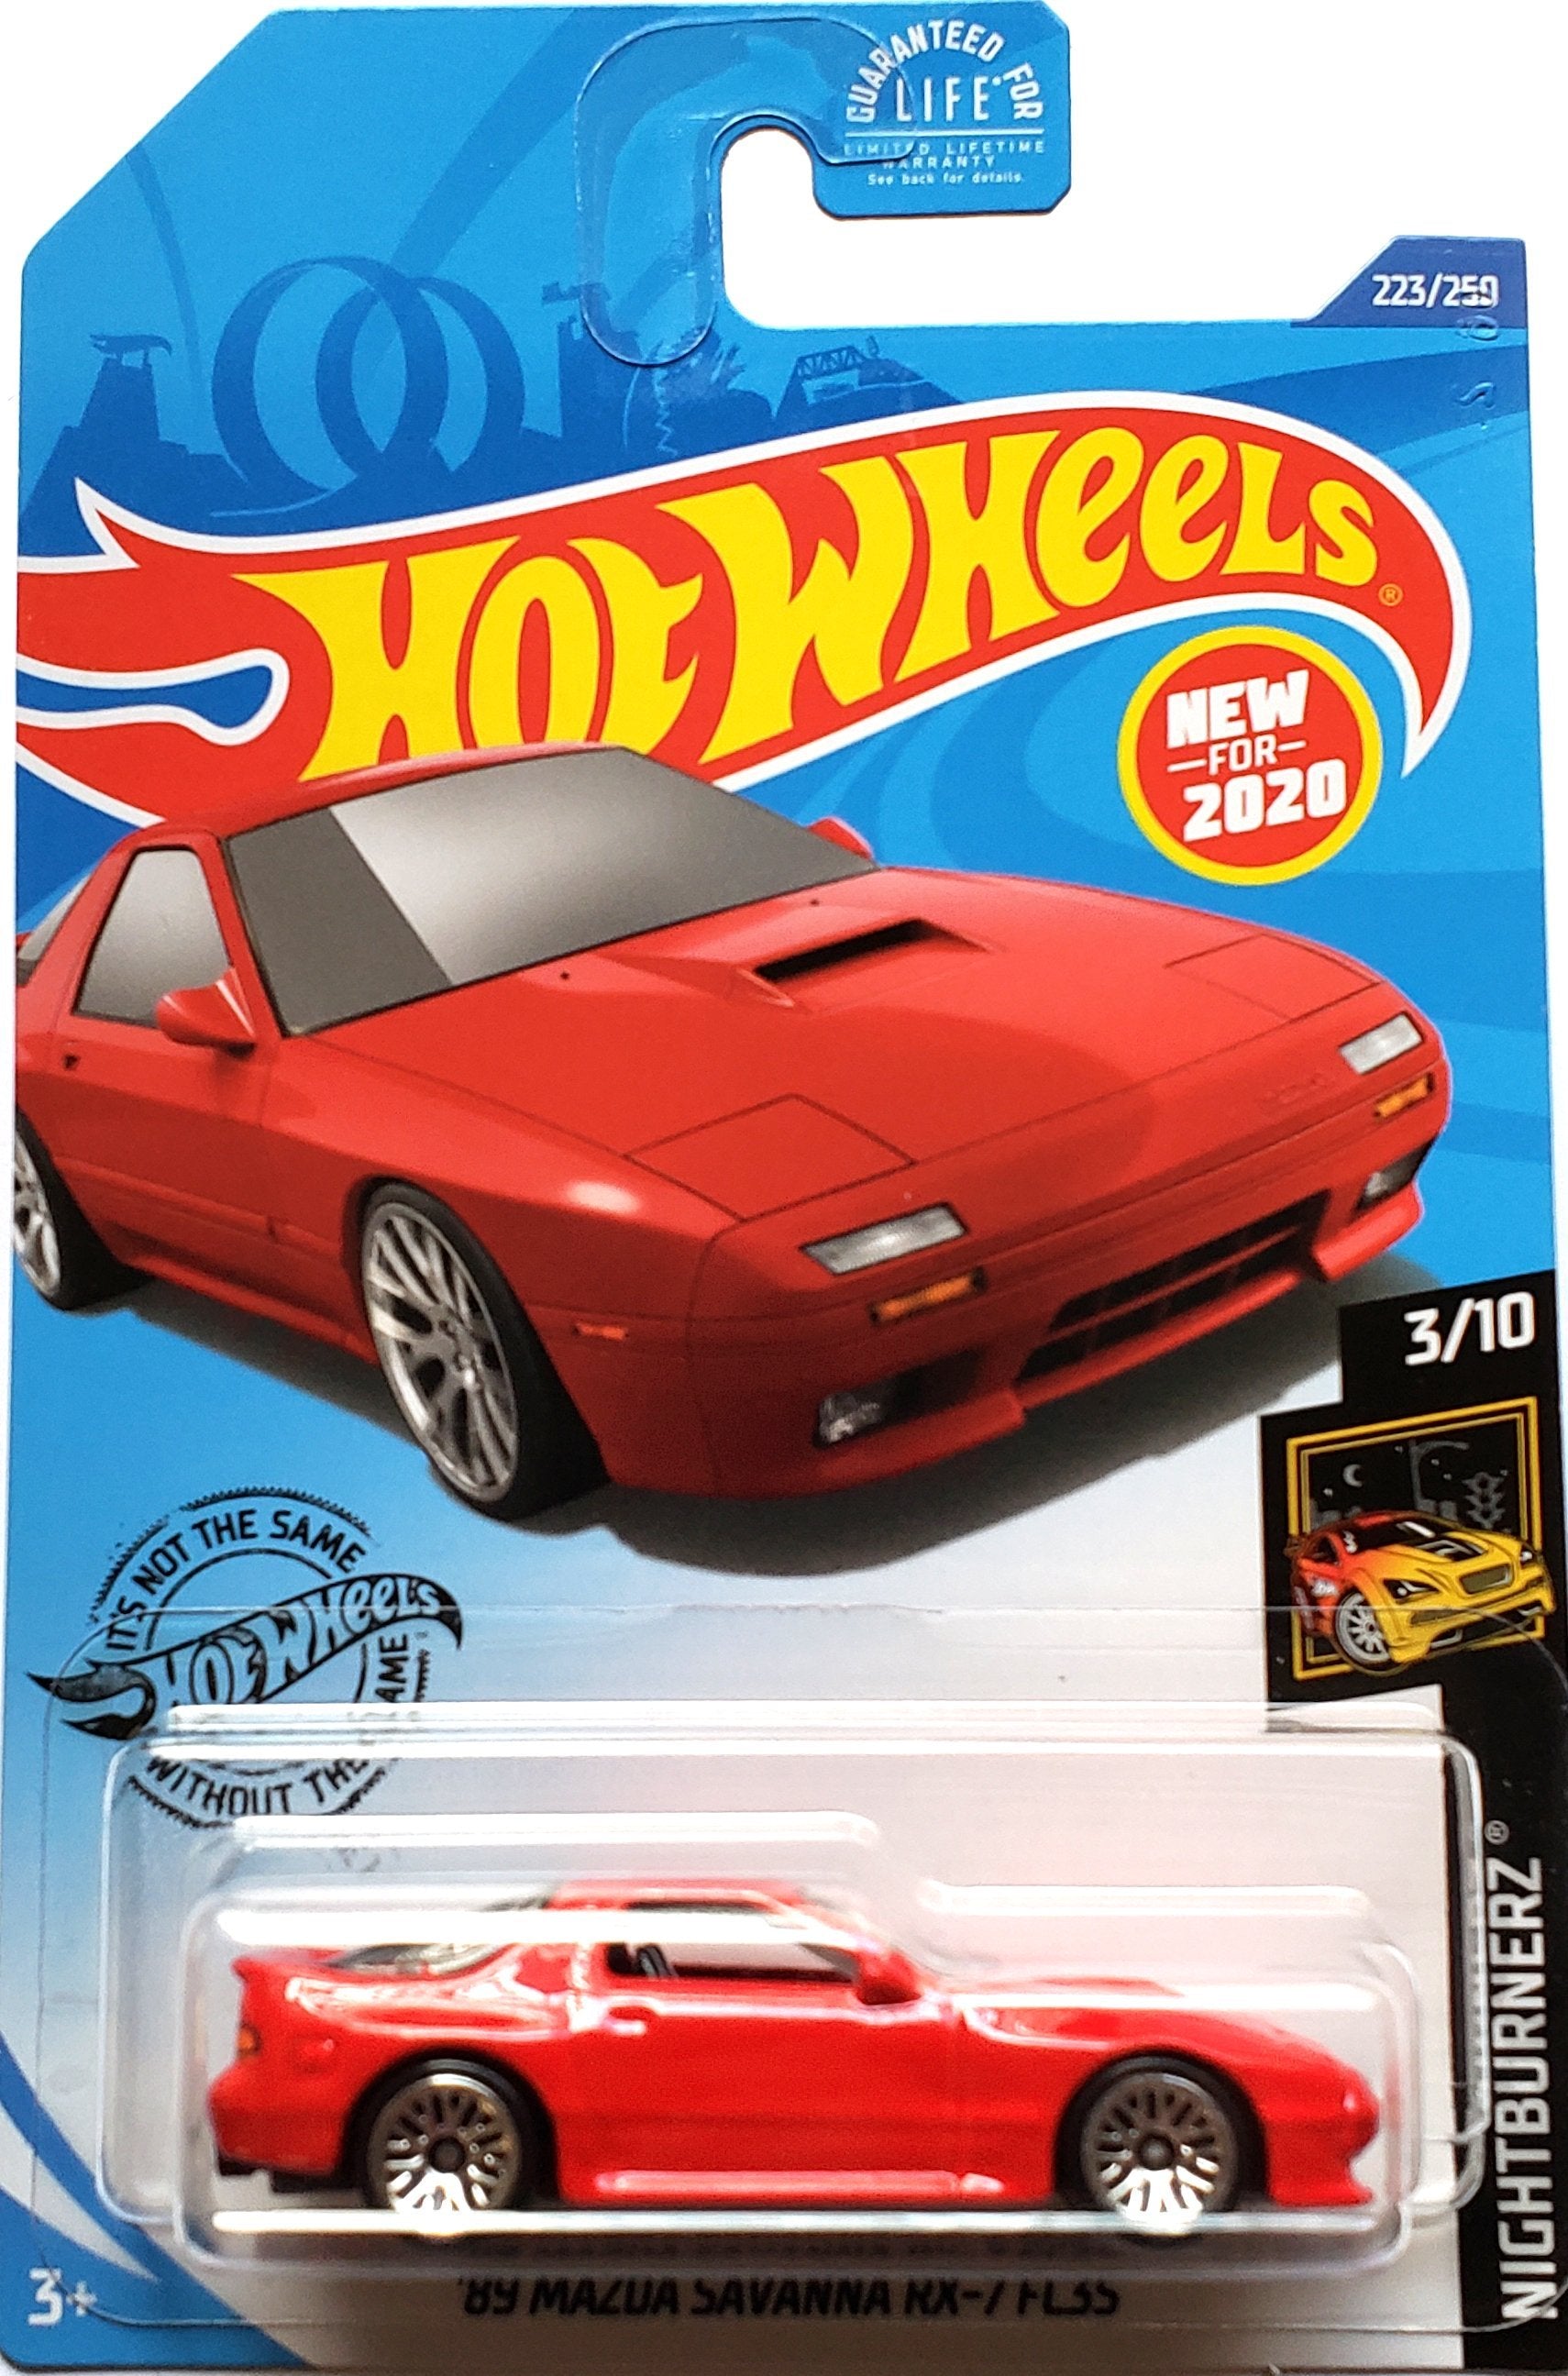 Details about   Hot Wheels LOOSE Red 1989 '89 MAZDA SAVANNA RX-7 FC35 Custom SUPER w/Real Riders 